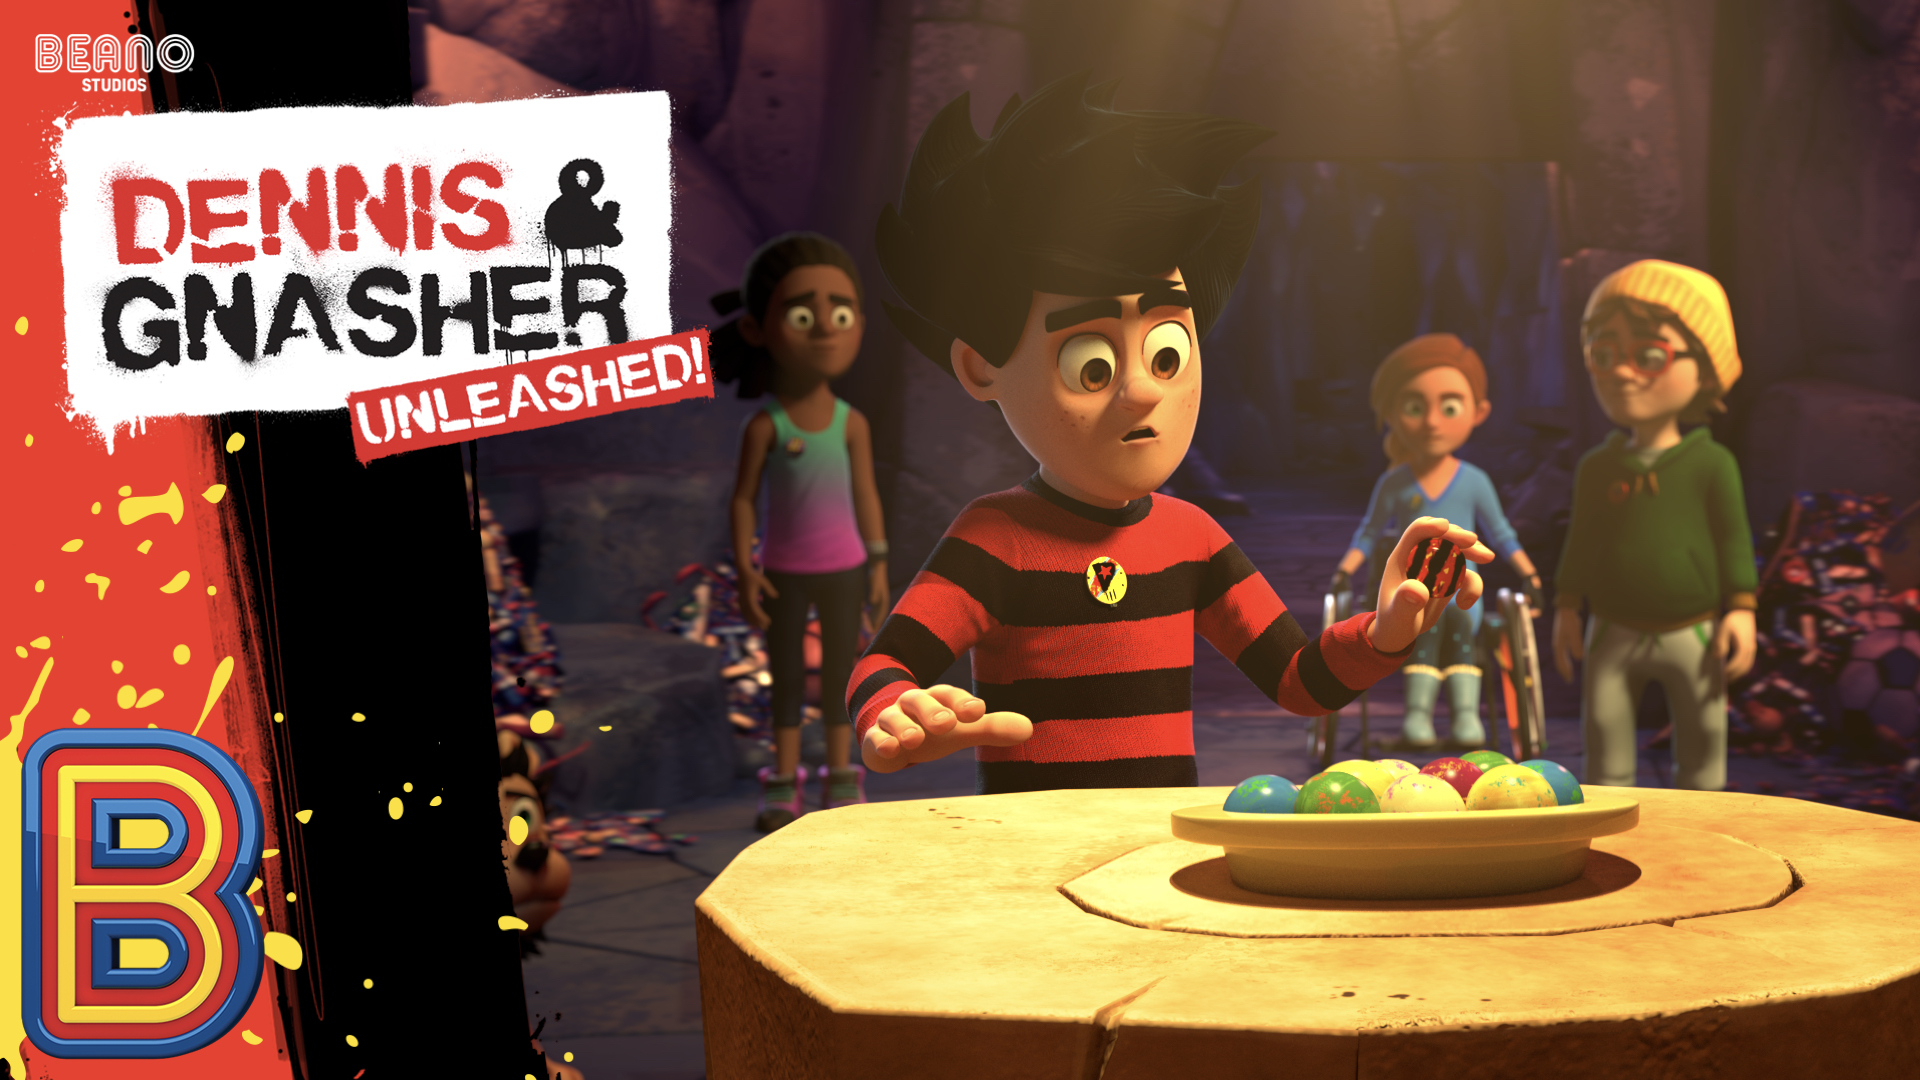 Dennis & Gnasher Unleashed! Episode 4: Raiders of the Lost Sweetie